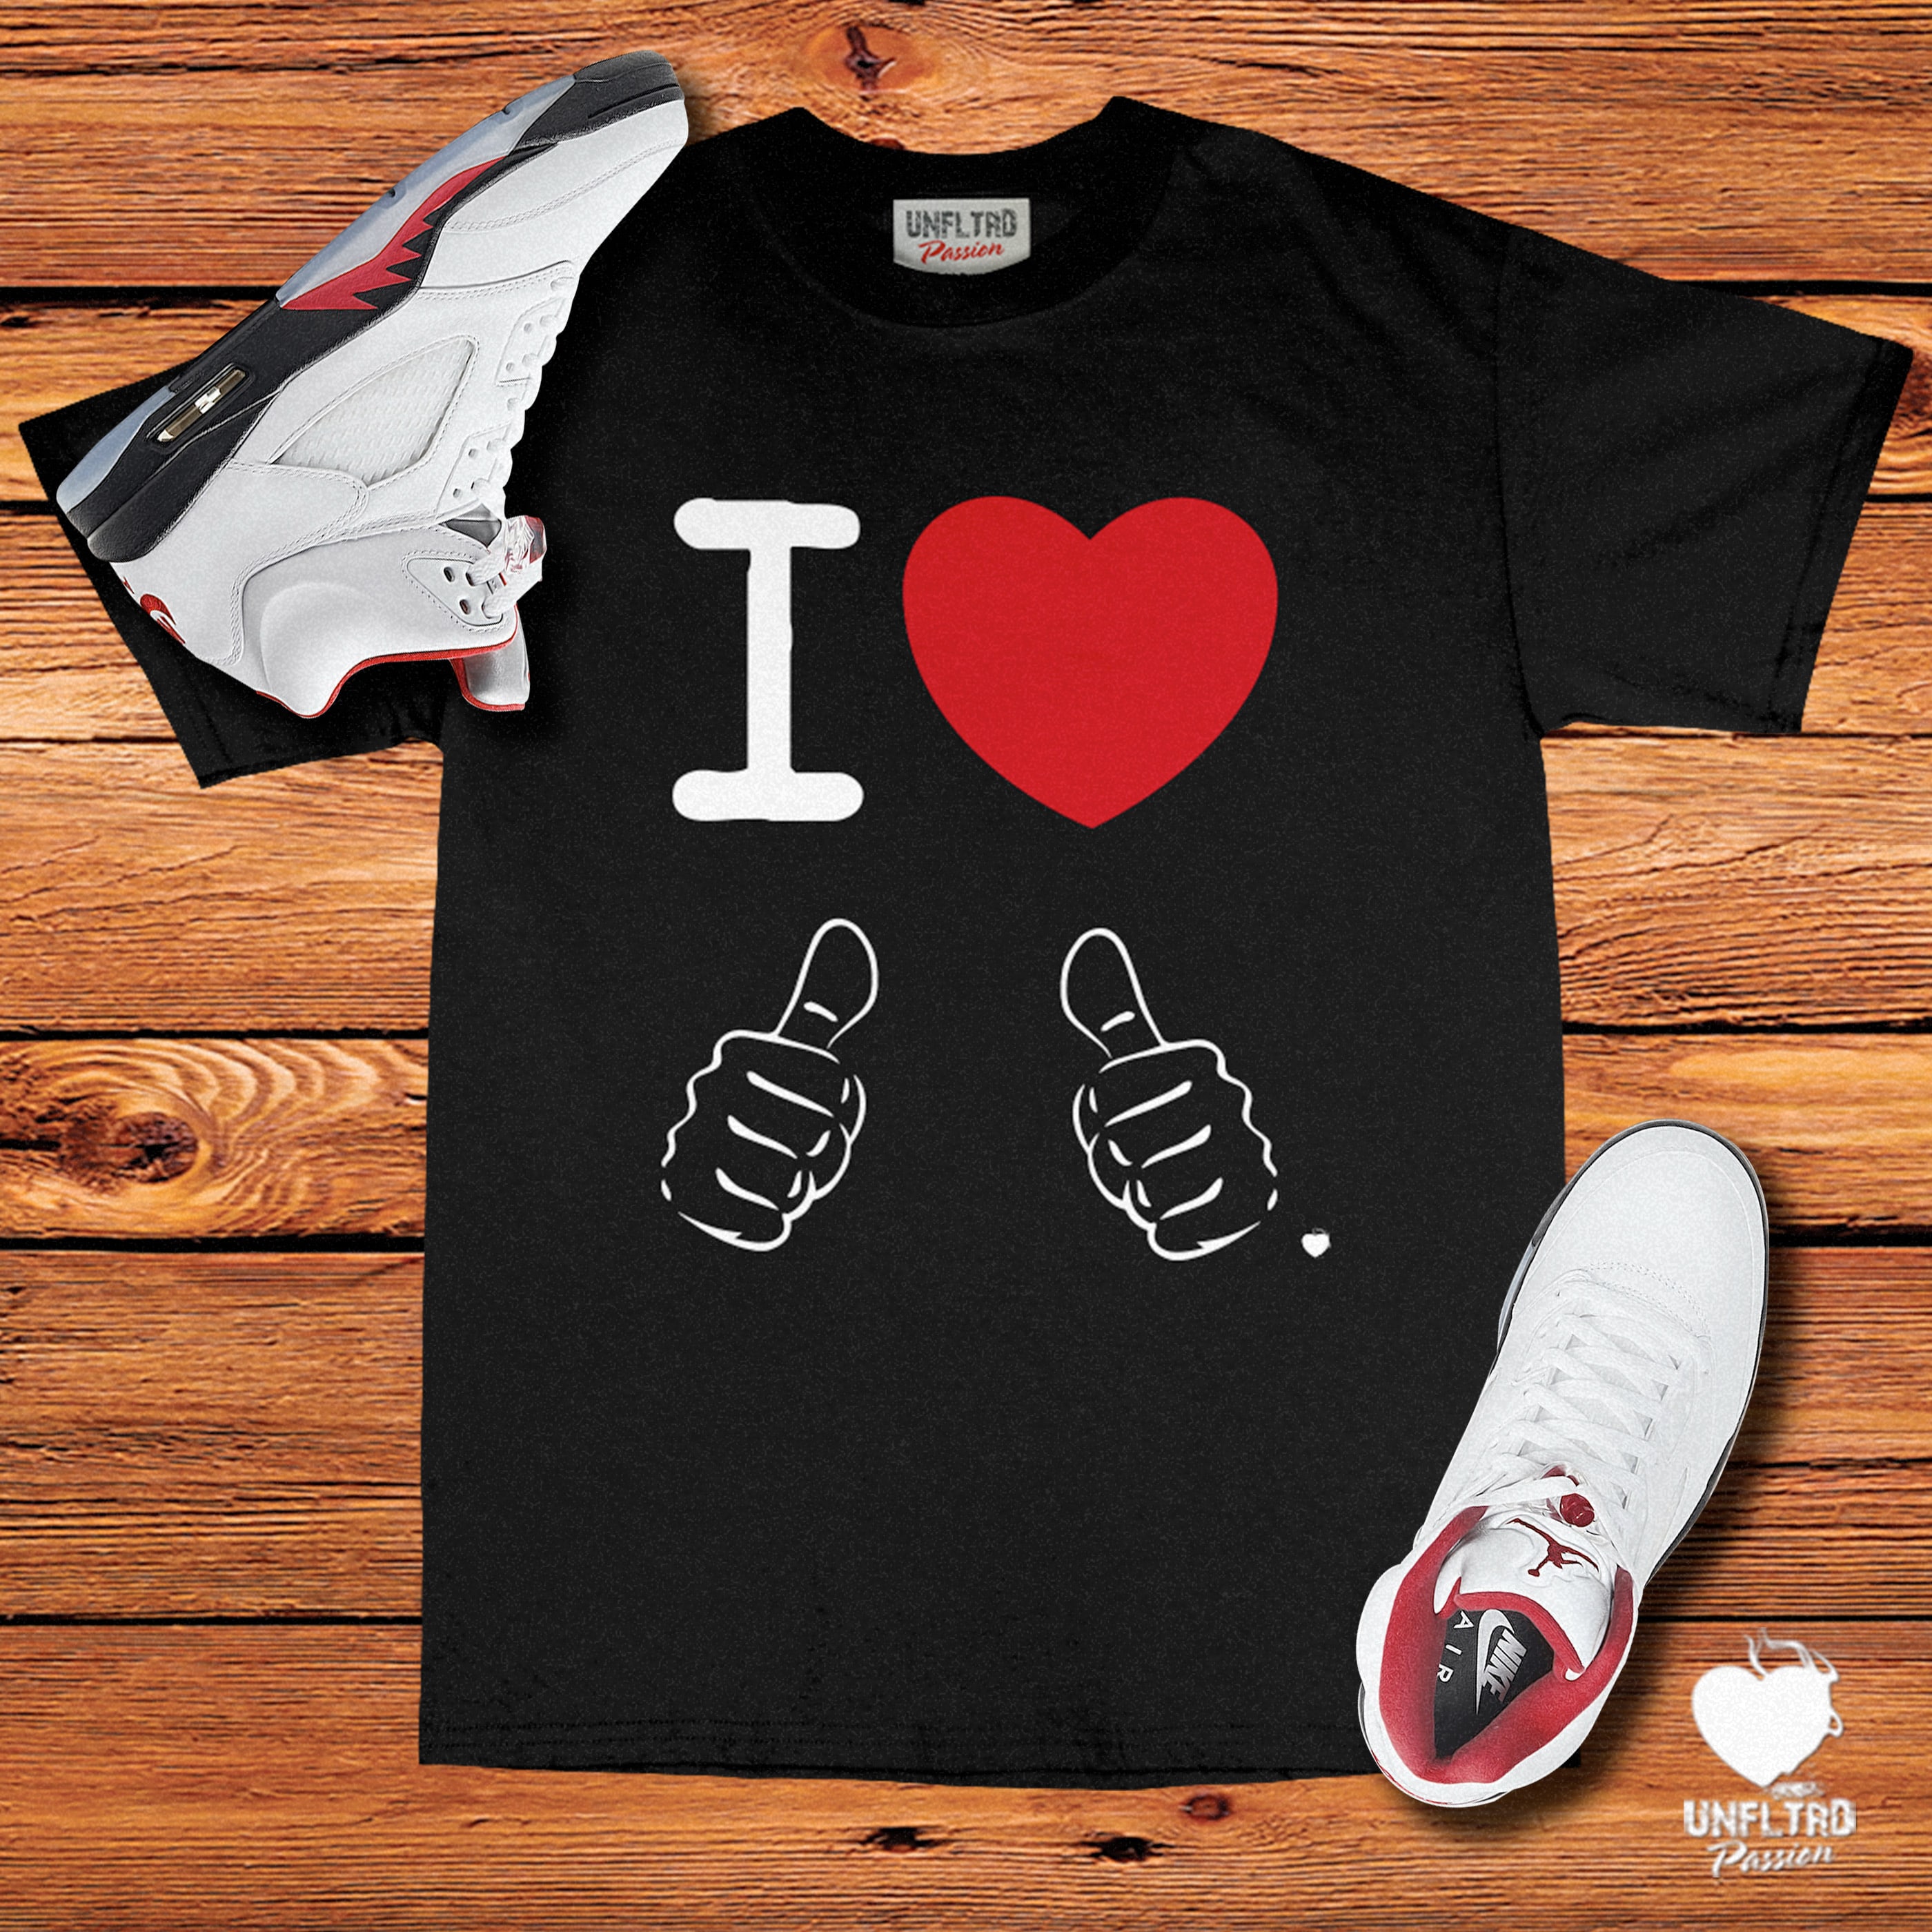 Fire Red Jordan 5 Black Tee I Love Me Shirt From Unfltrd Passion